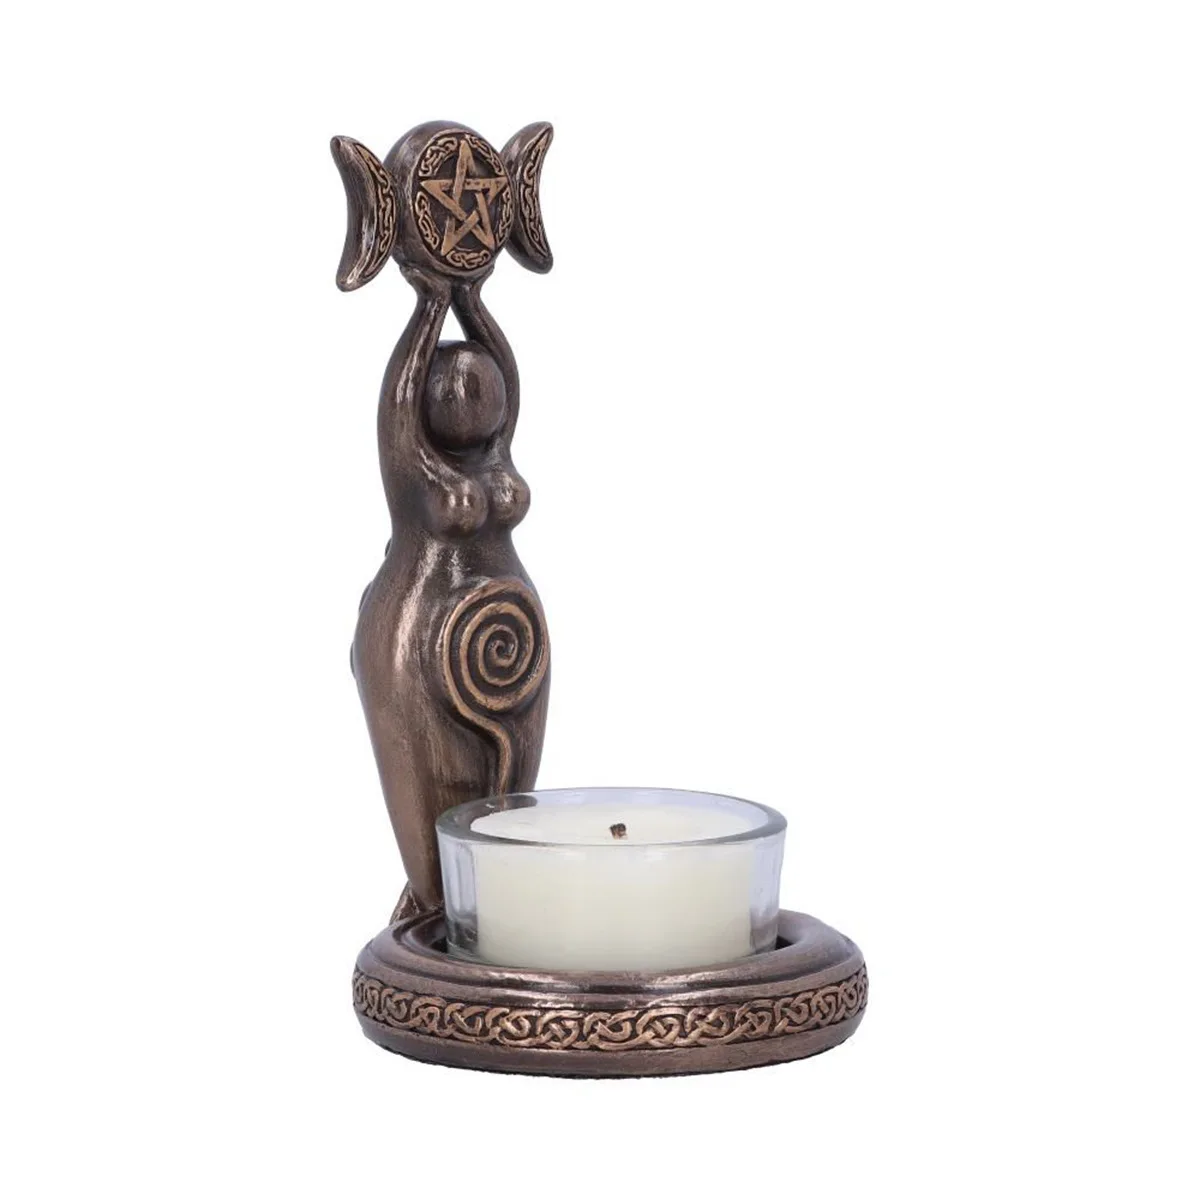 

Hot selling three-phase moon goddess tea candle incense candlestick resin handicraft home desktop decoration ornaments